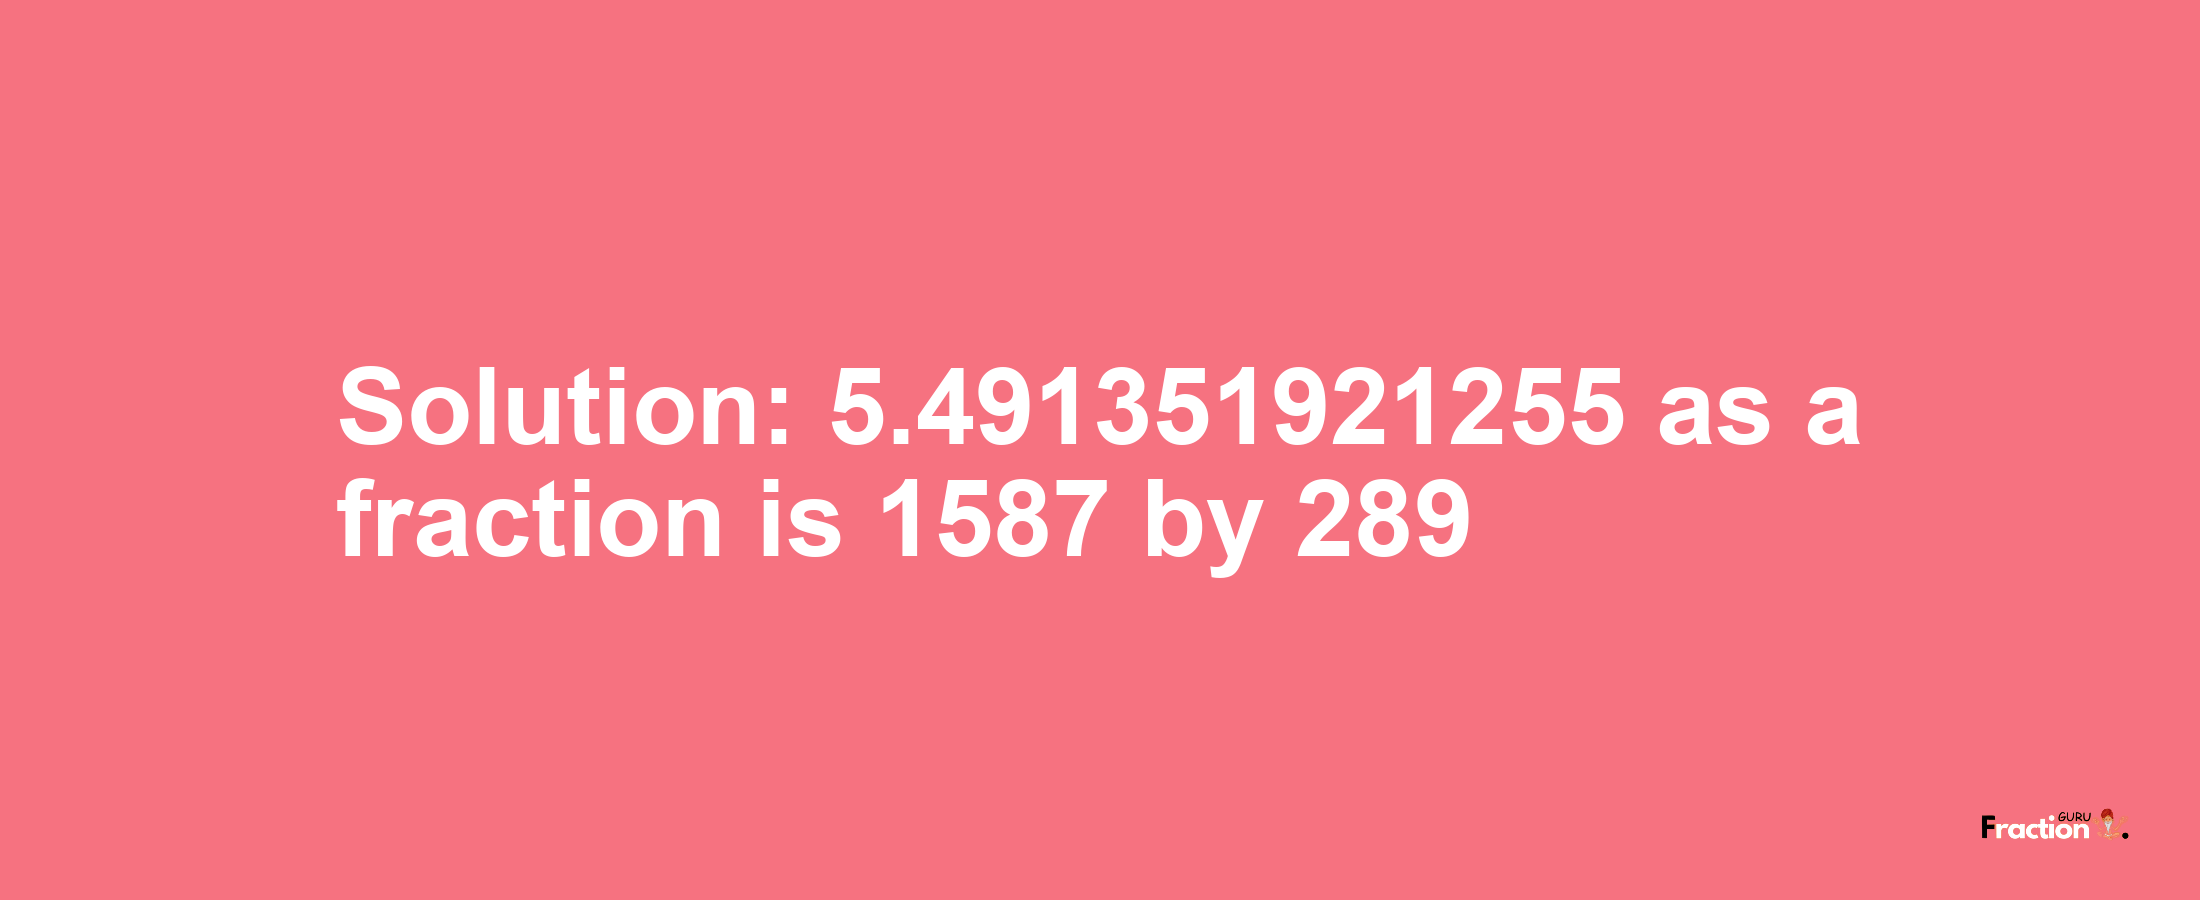 Solution:5.491351921255 as a fraction is 1587/289